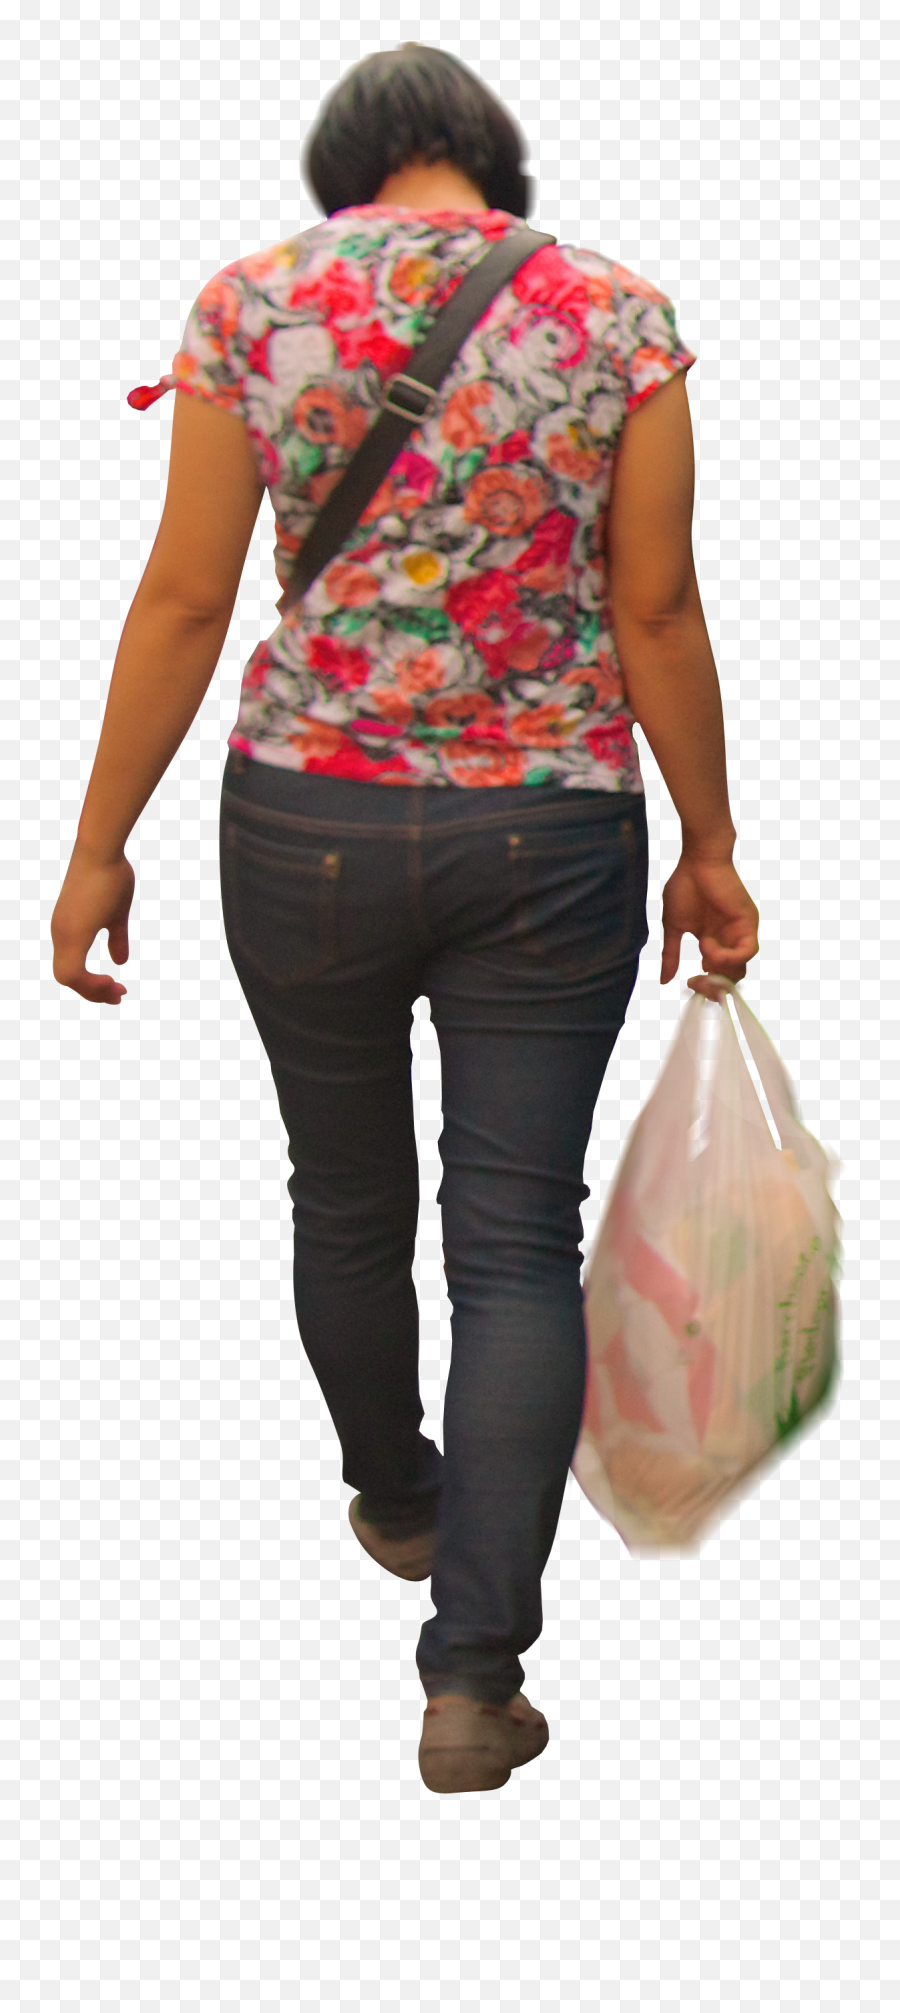 Woman With Plastic Bag U2014 Architextures Png